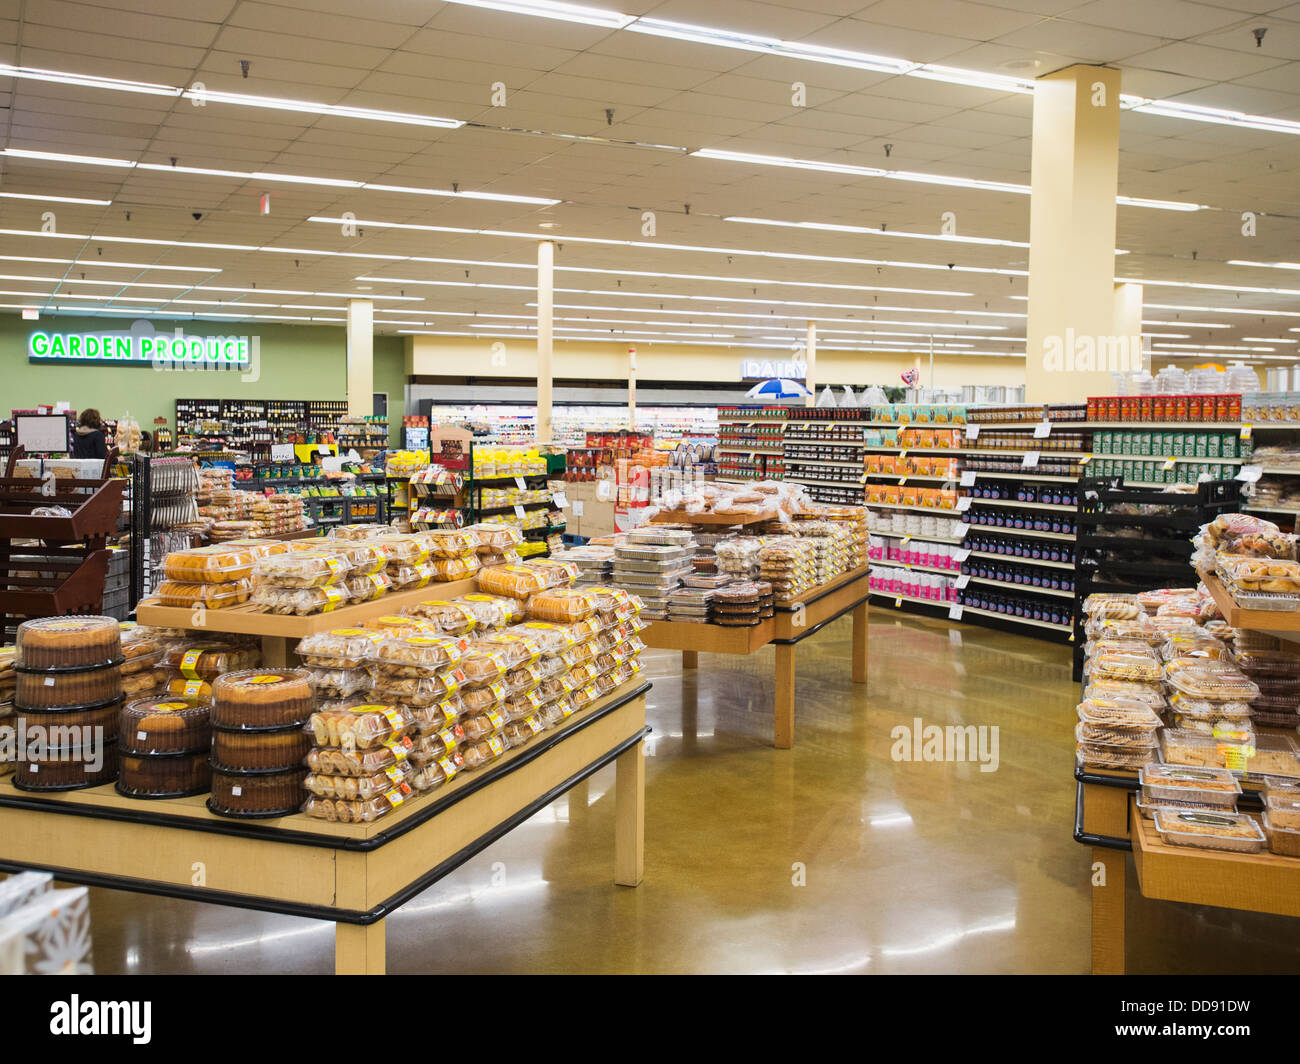 Baked goods section of grocery store Stock Photo